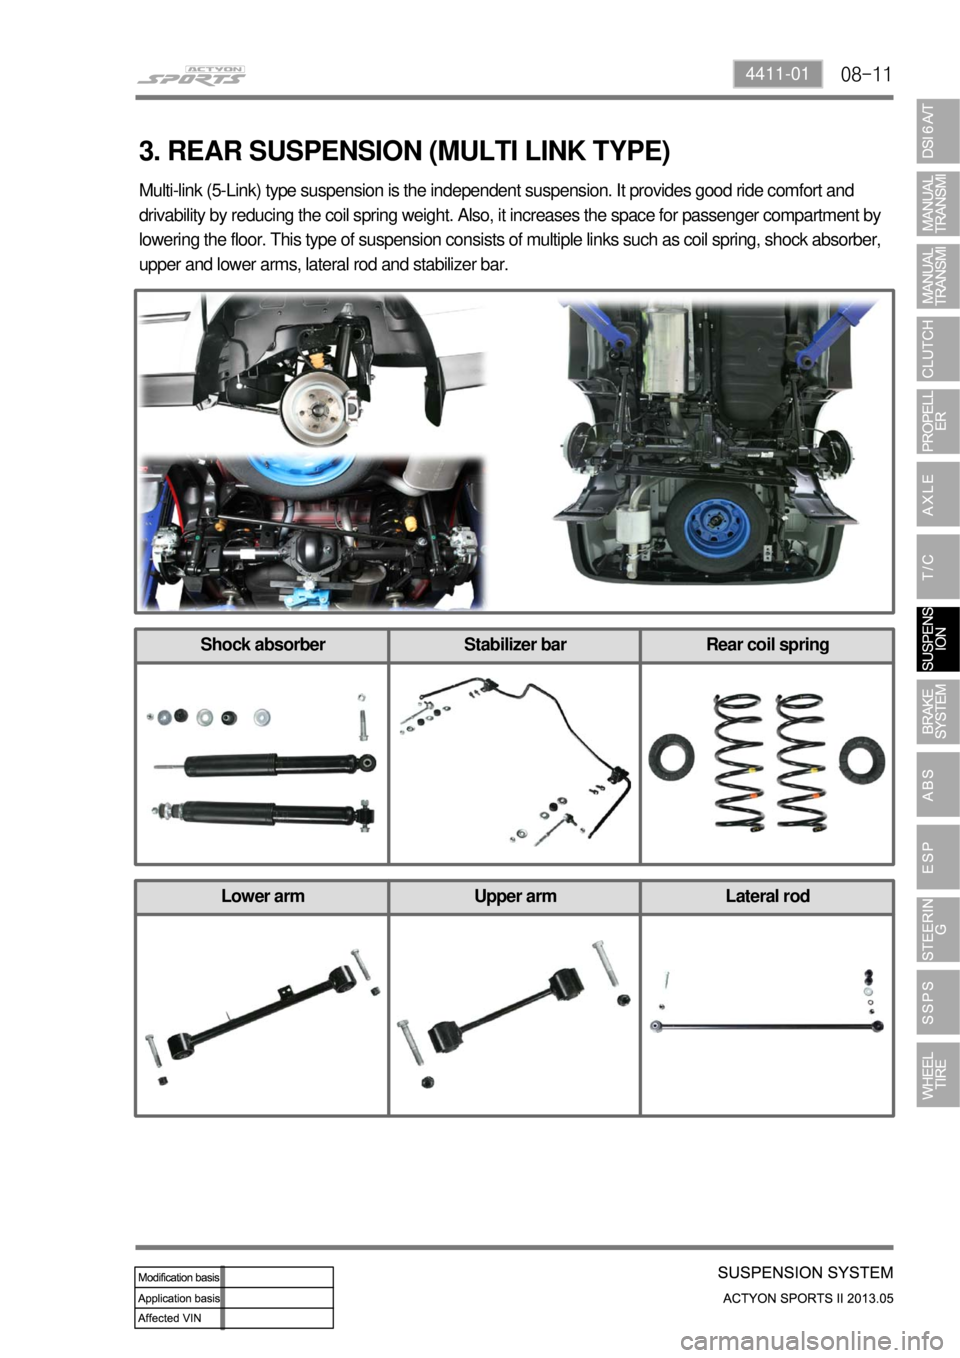 SSANGYONG NEW ACTYON SPORTS 2013  Service Manual 08-114411-01
3. REAR SUSPENSION (MULTI LINK TYPE)
Multi-link (5-Link) type suspension is the independent suspension. It provides good ride comfort and 
drivability by reducing the coil spring weight. 